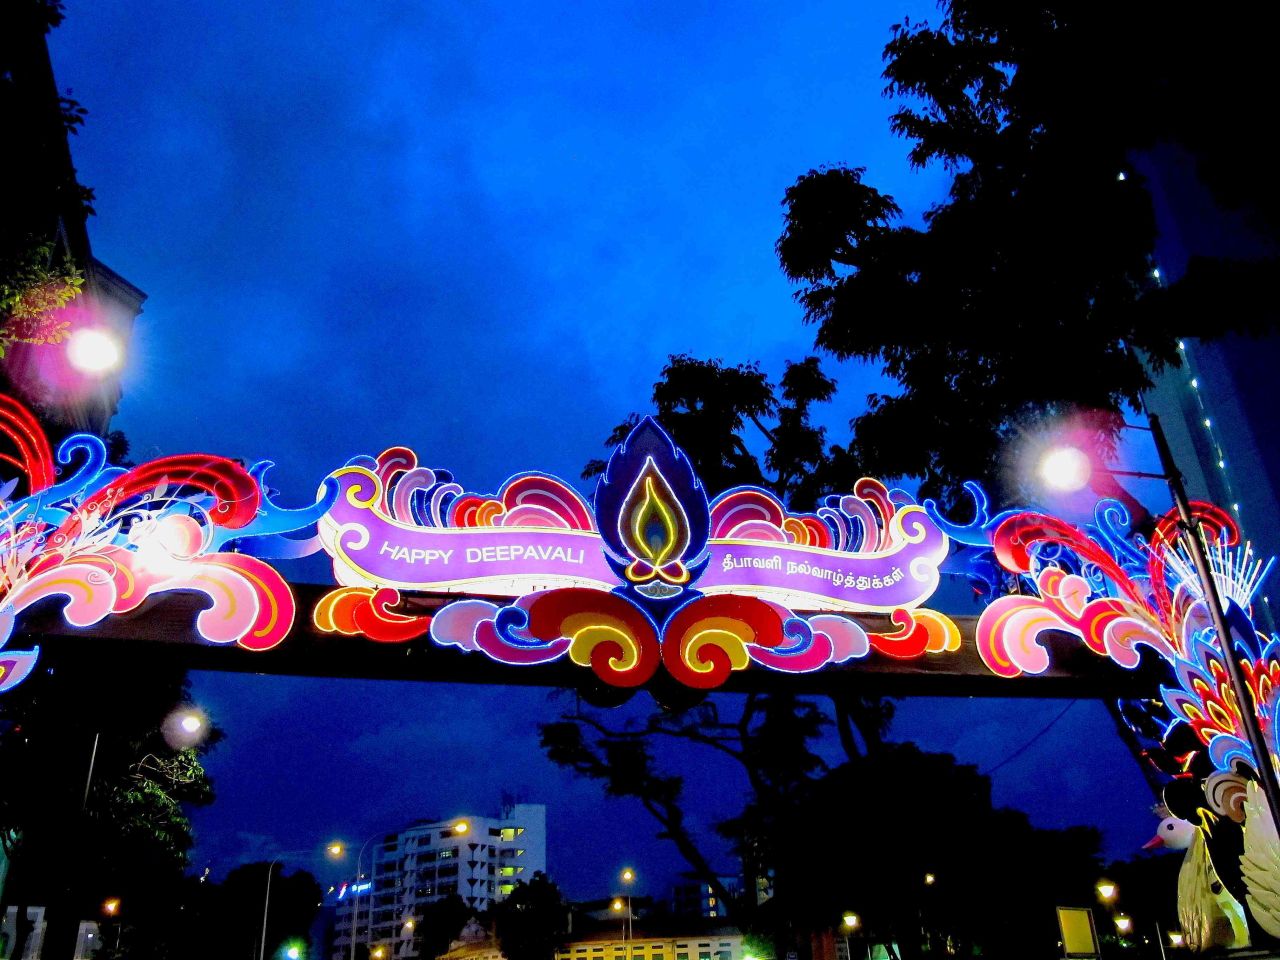 A vivid neon sign celebrating Diwali hangs above Singapore's Little India district. The image was captured by iReporter, <a href="http://ireport.cnn.com/people/MonikaKH">Monika Khaled</a>, an Austrian living and working in the populous Asian city state. "Deepavali in Singapore is a great event visited by visitors and locals alike and not just Indians," she says